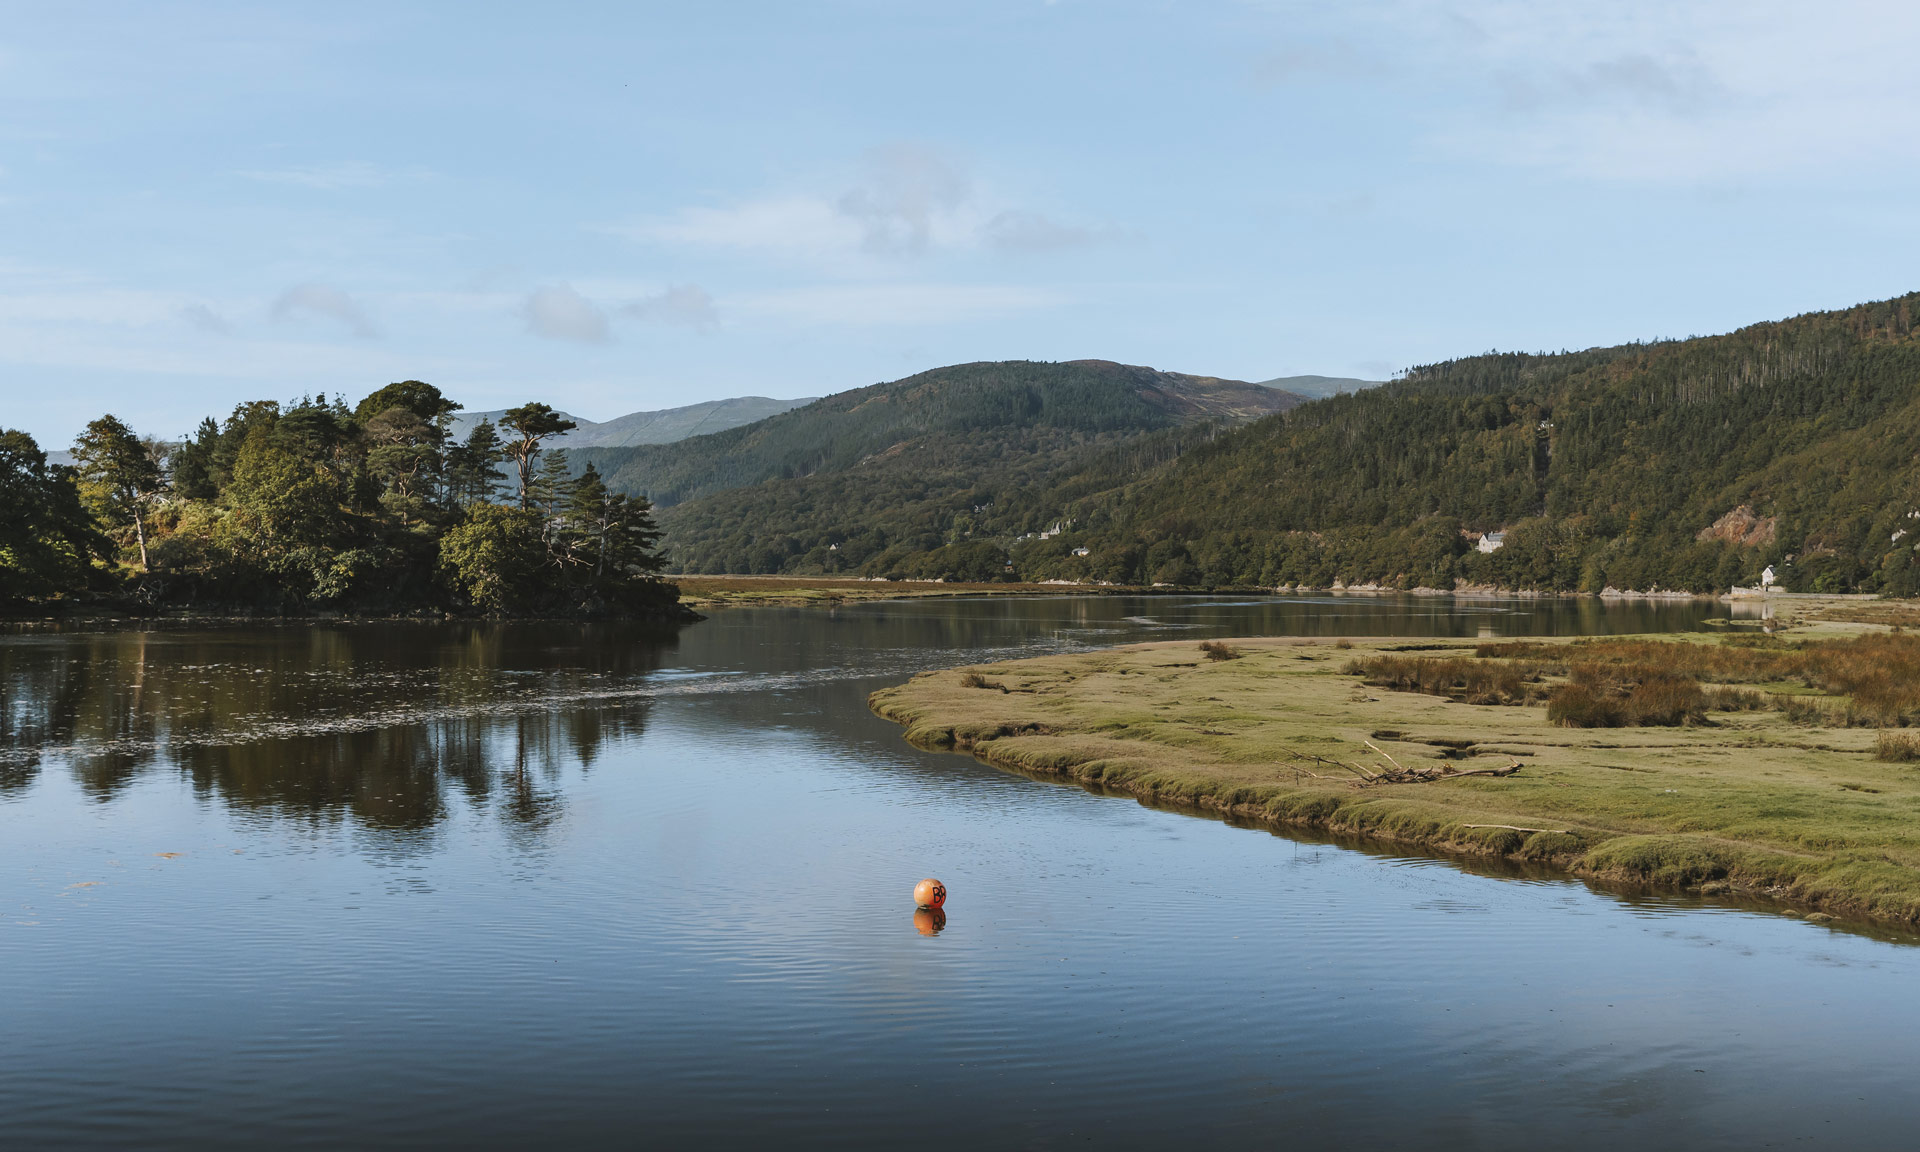 A view of the Mawddach Estuary on a clear spring day with woodland lining the shores.